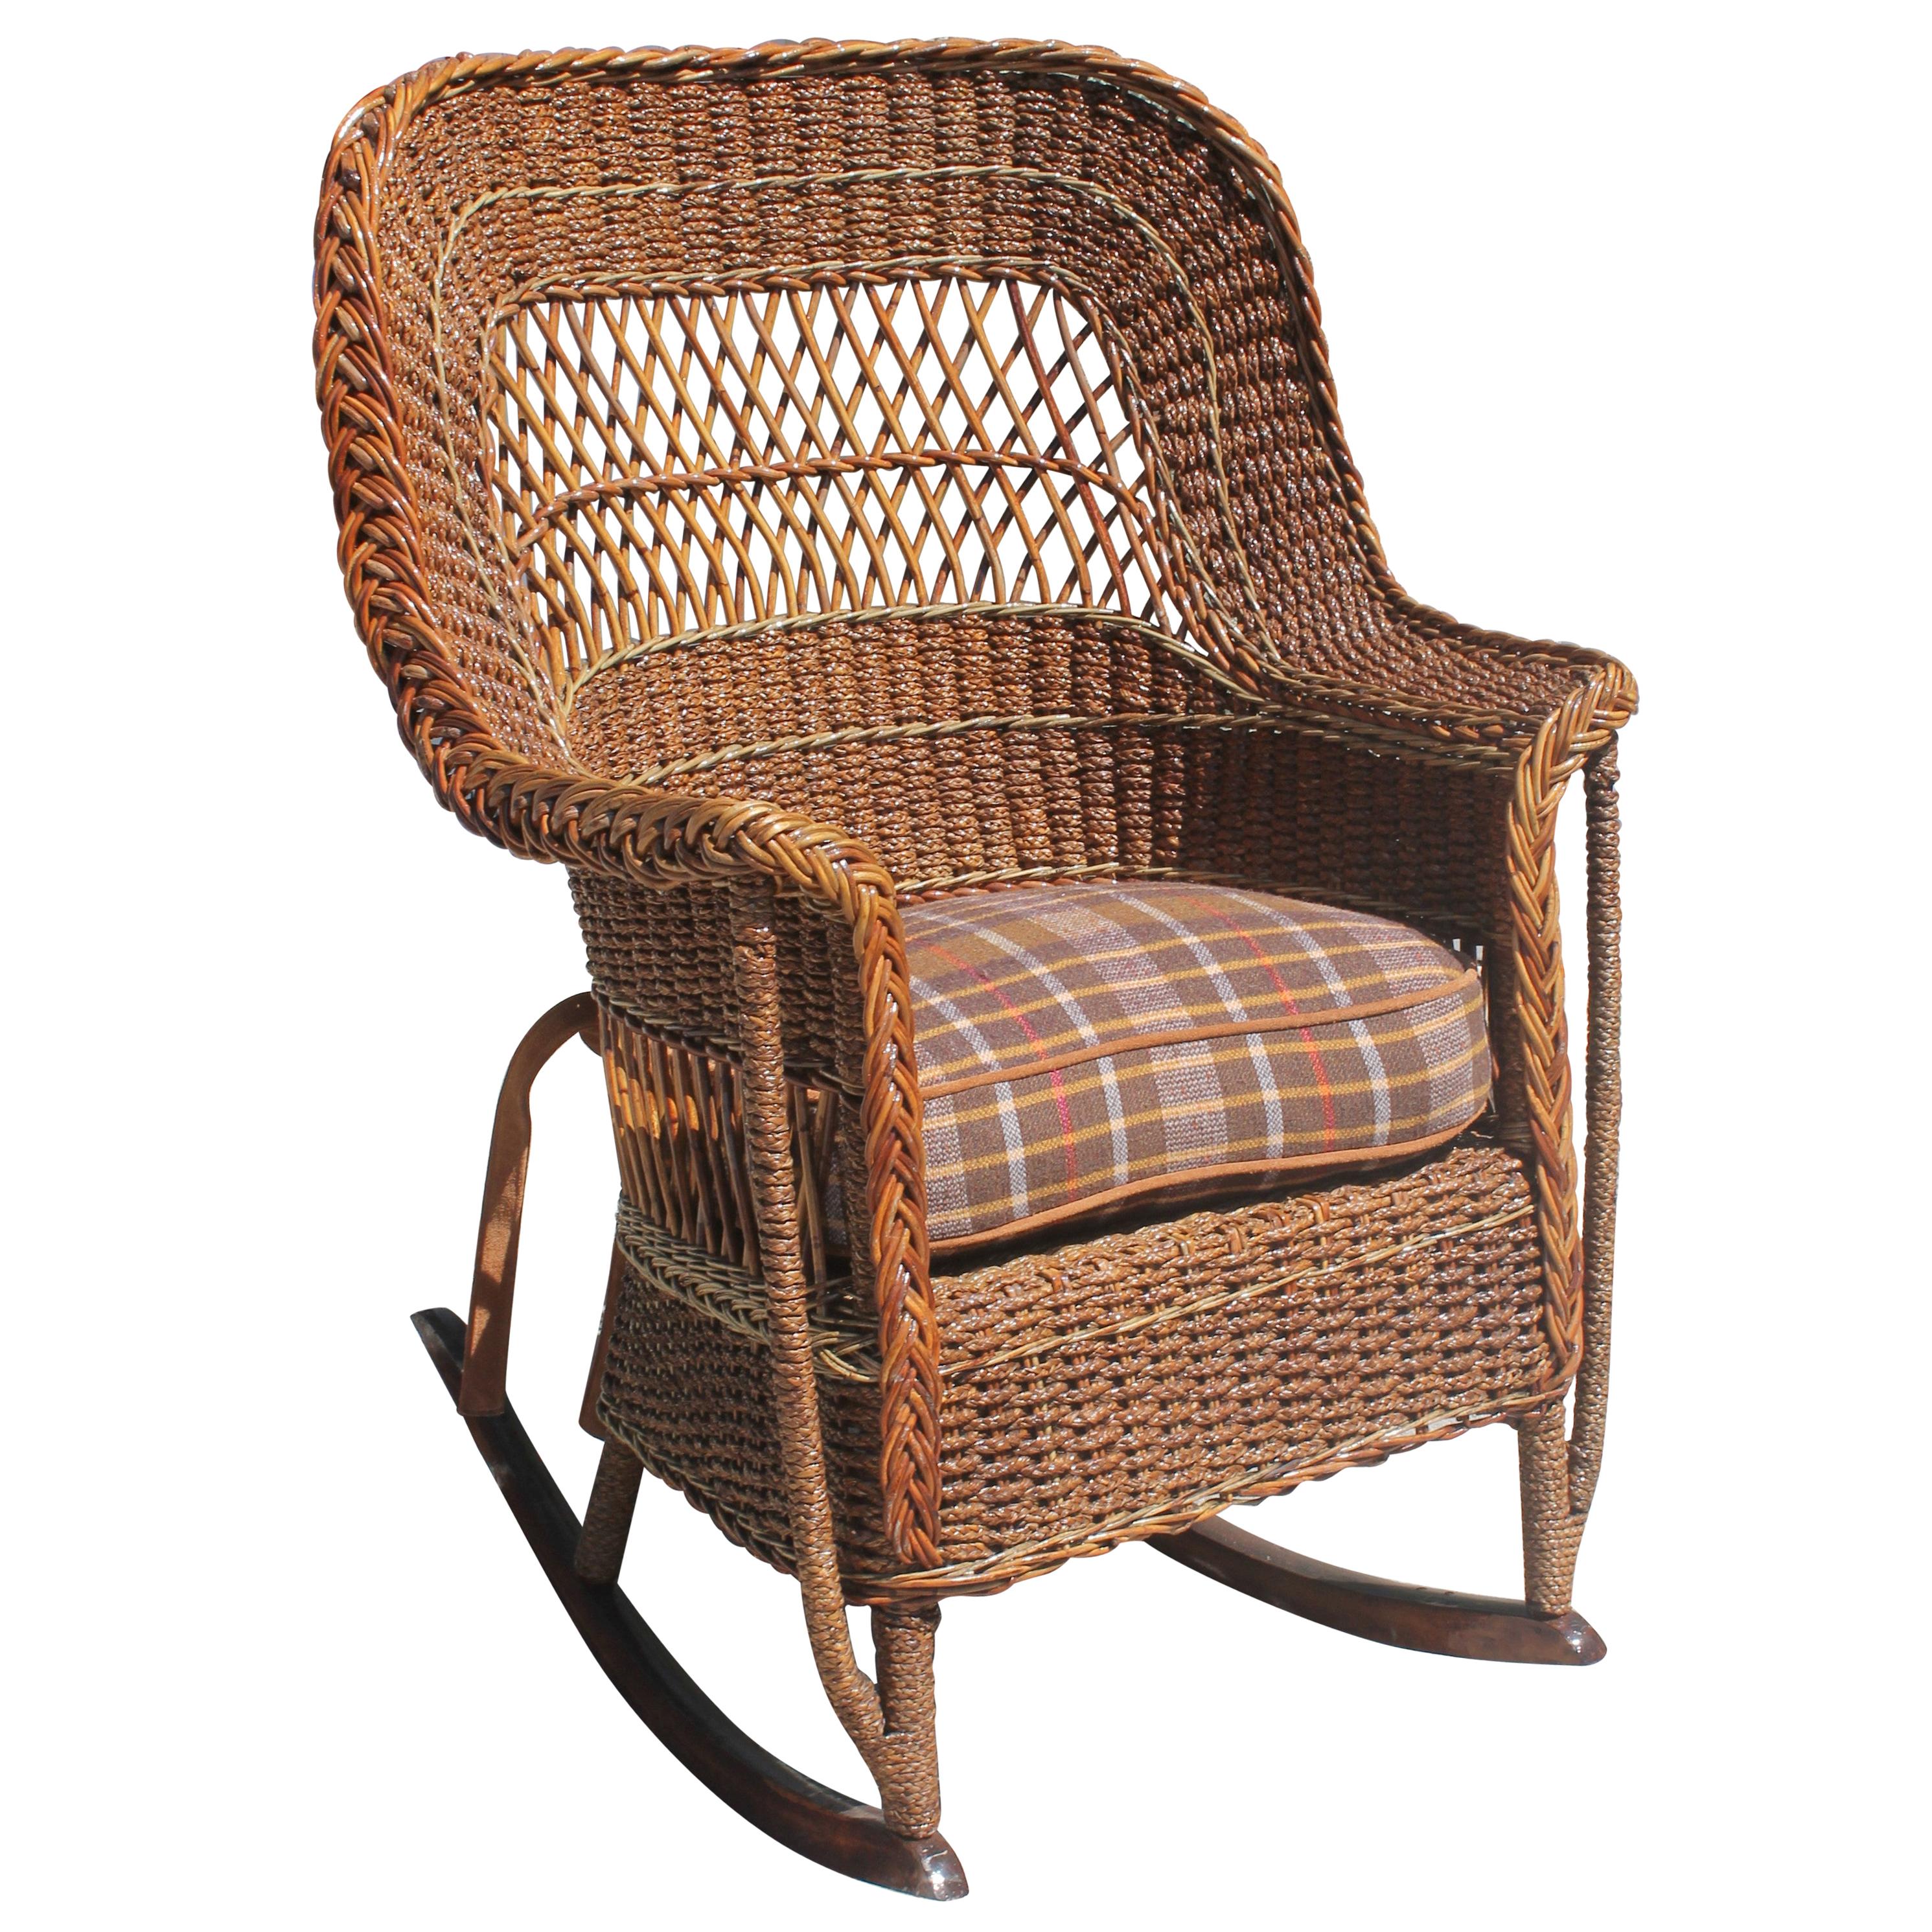 Antique Sea Grass and Wicker Rocker with Custom Cushion